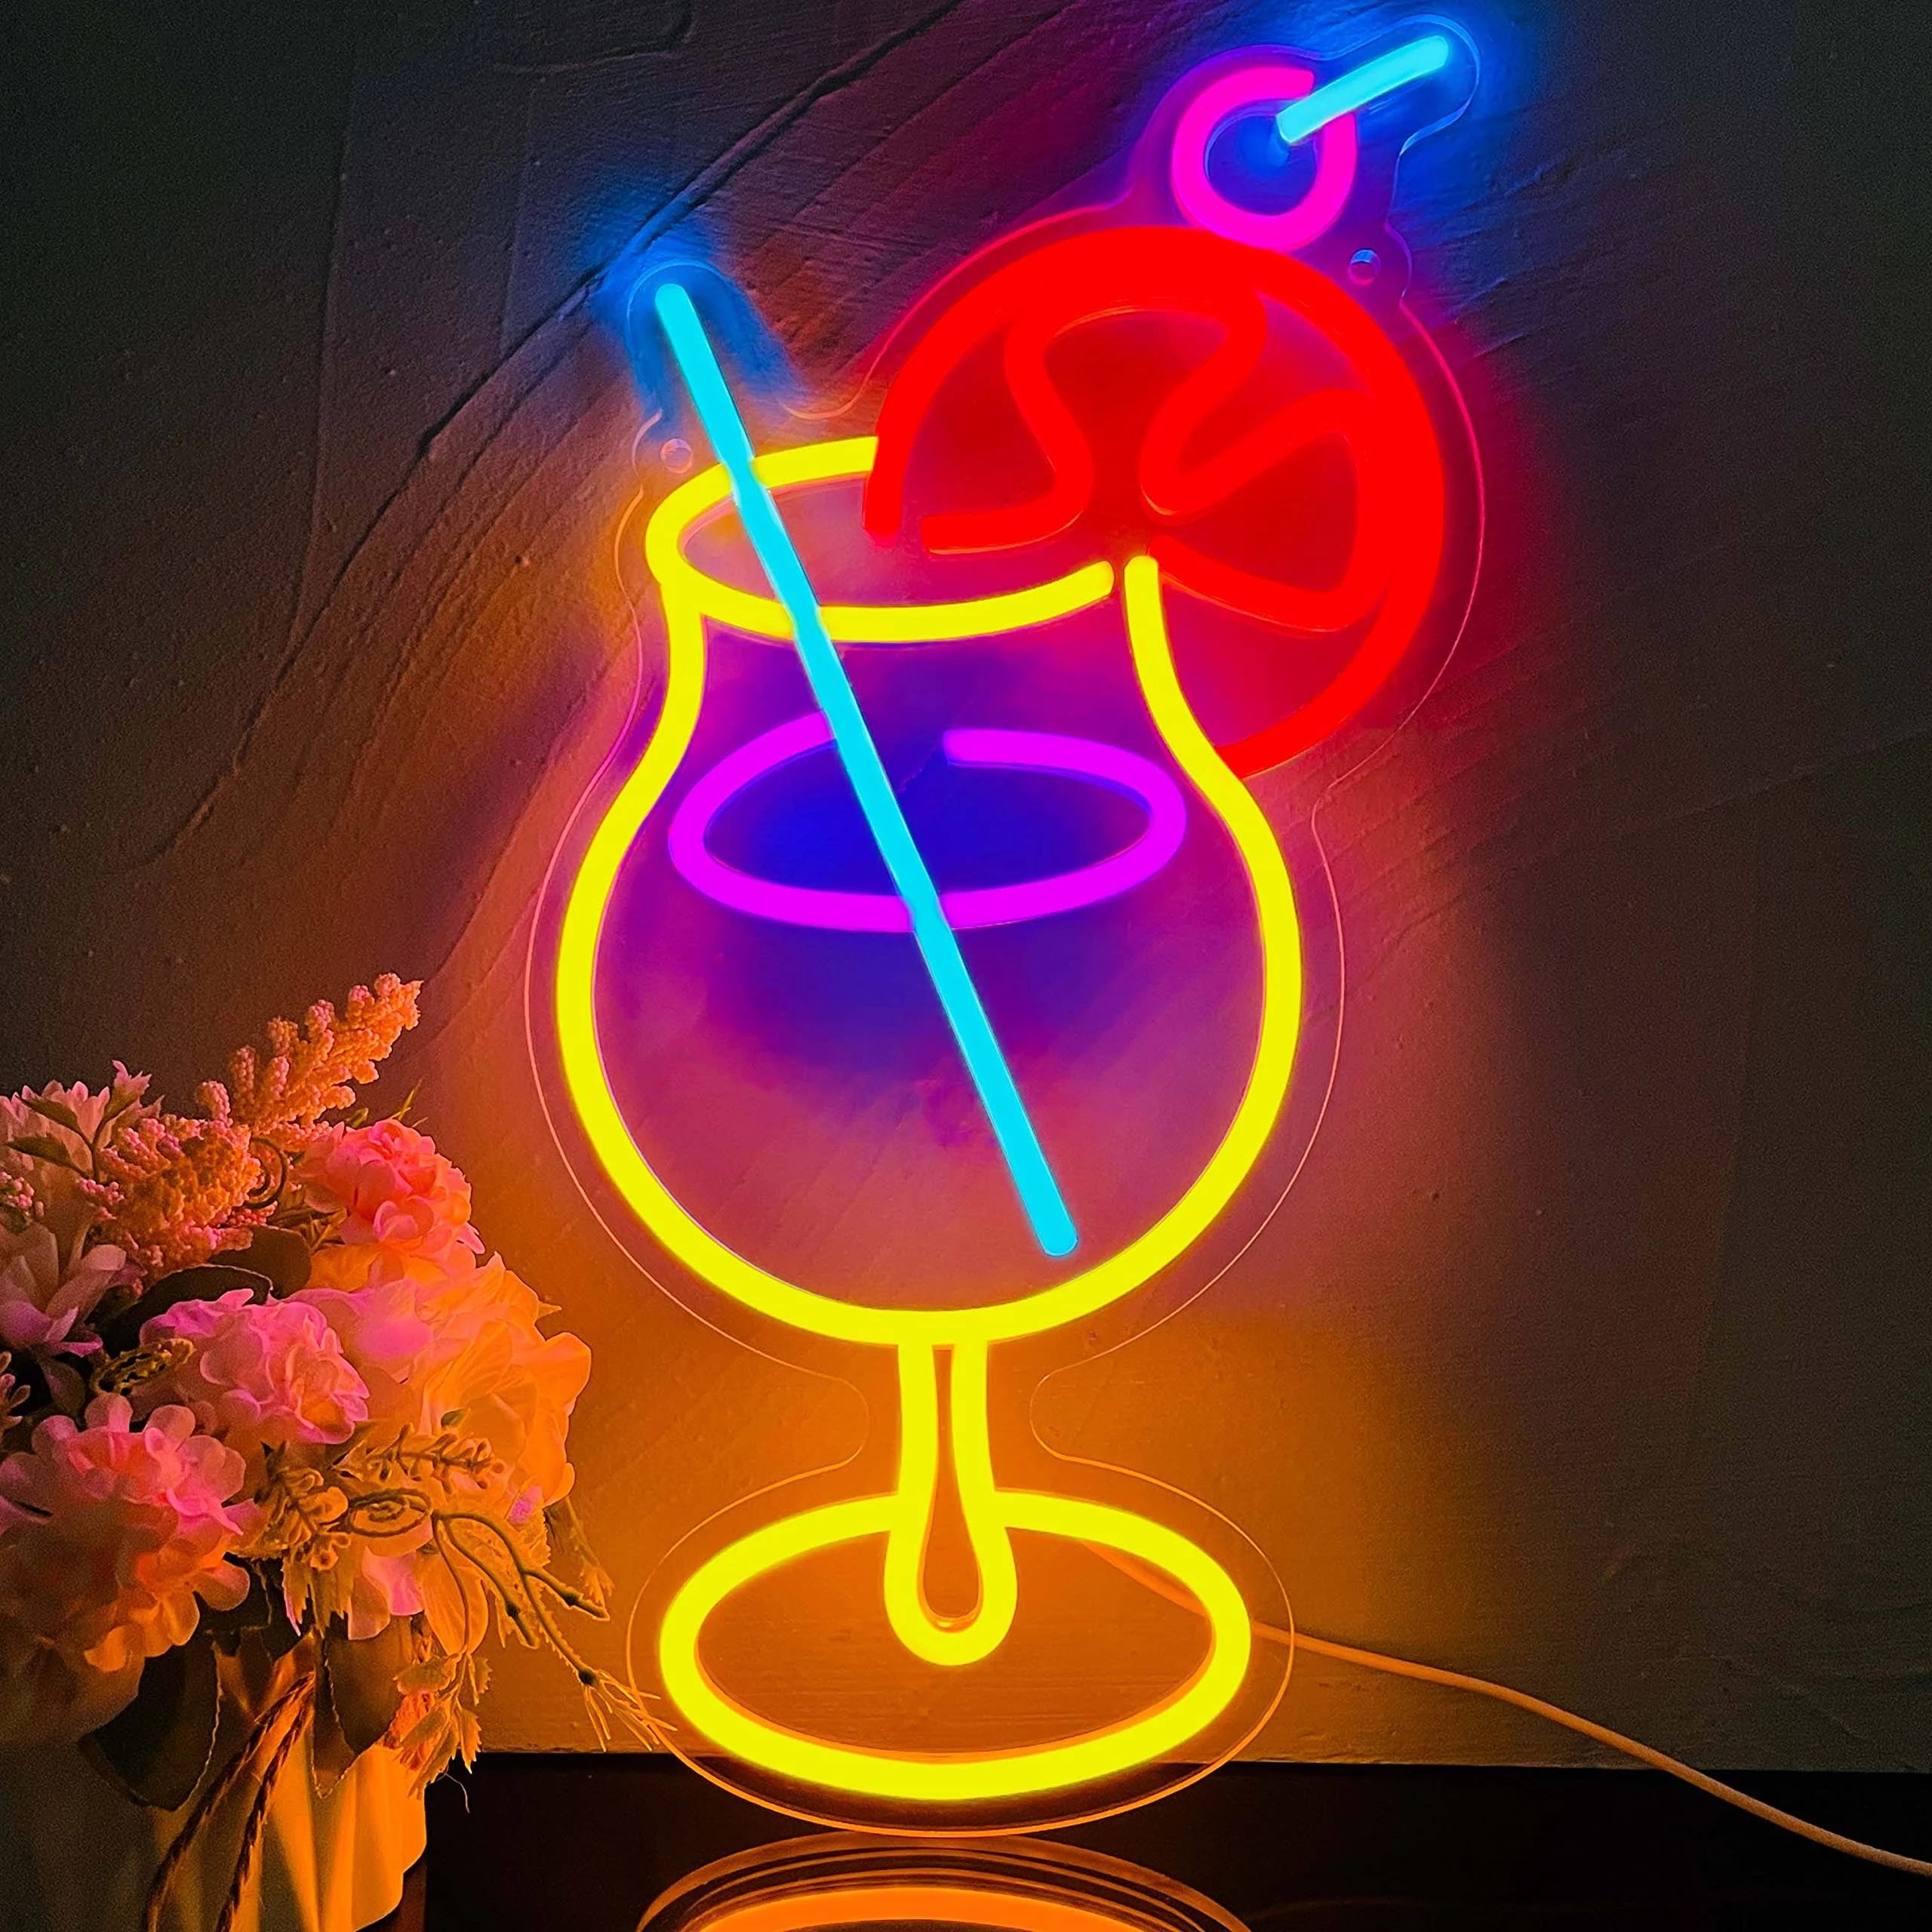 Stylish Cocktail Cup Neon Light for Home Bar Decor | Image